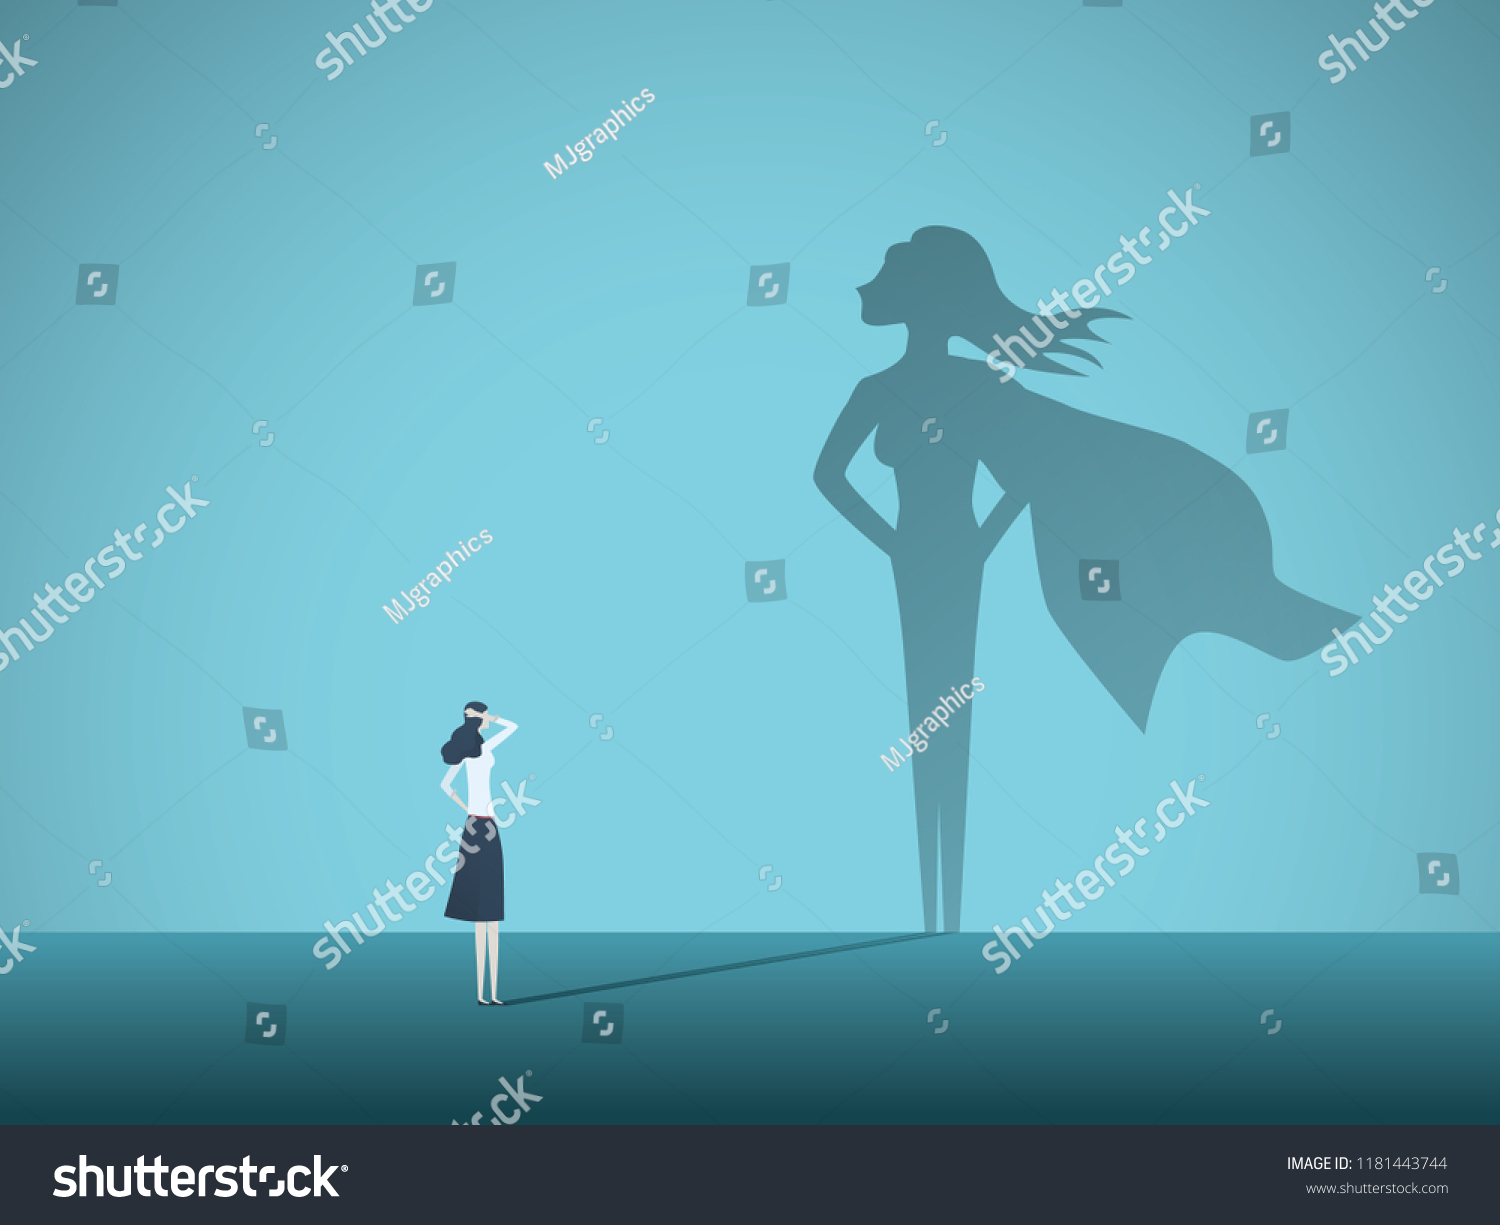 Businesswoman with superhero shadow vector concept. Business symbol of emancipation, ambition, success, motivation, leadership, courage and challenge. Eps10 vector illustration